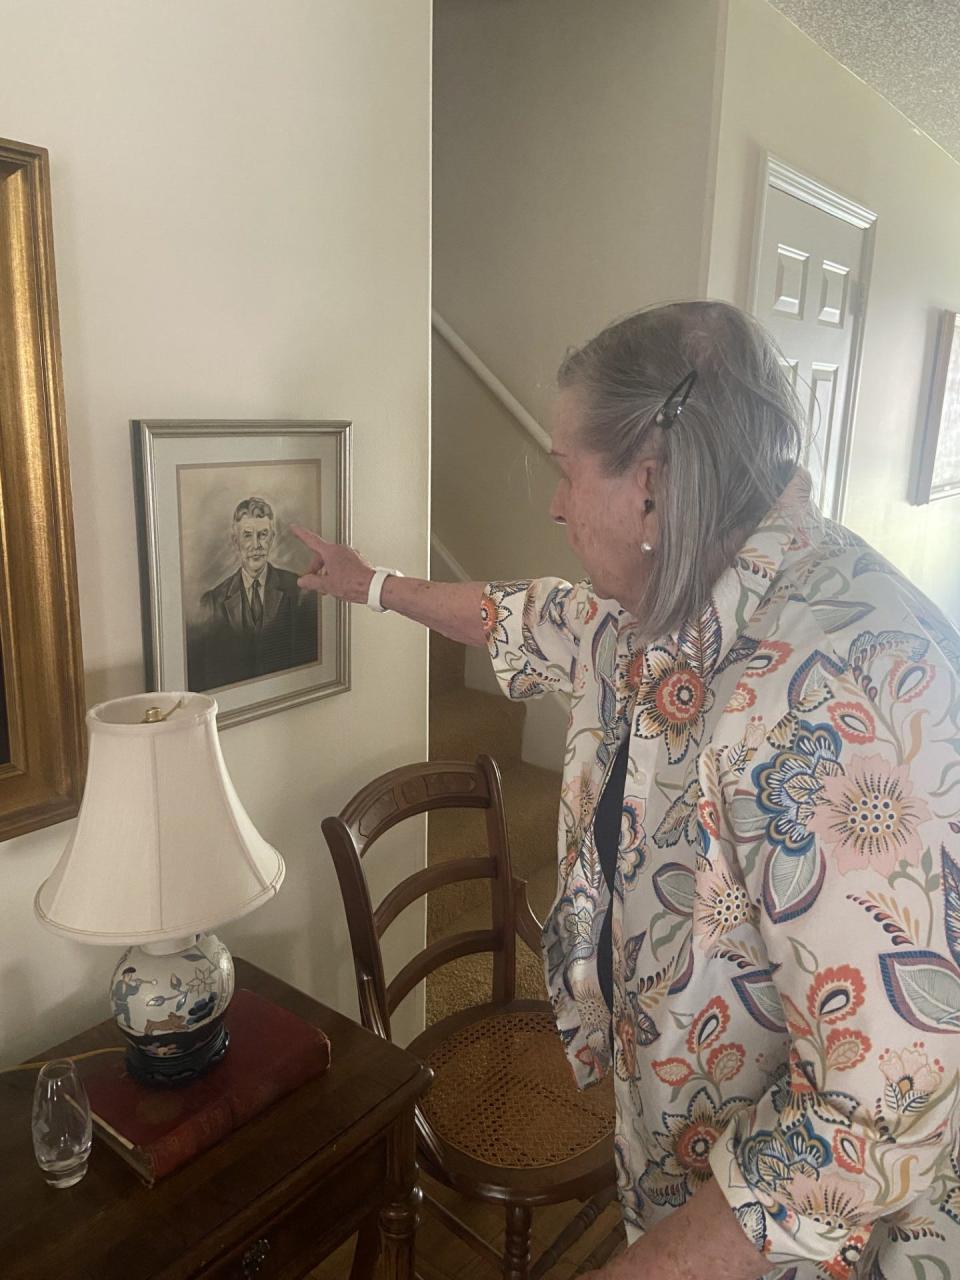 Tillie Stacy points to a framed sketch of her grandfather, who served as harbor master for the Savannah River and kept the harbor safe from the enemy during World War I.